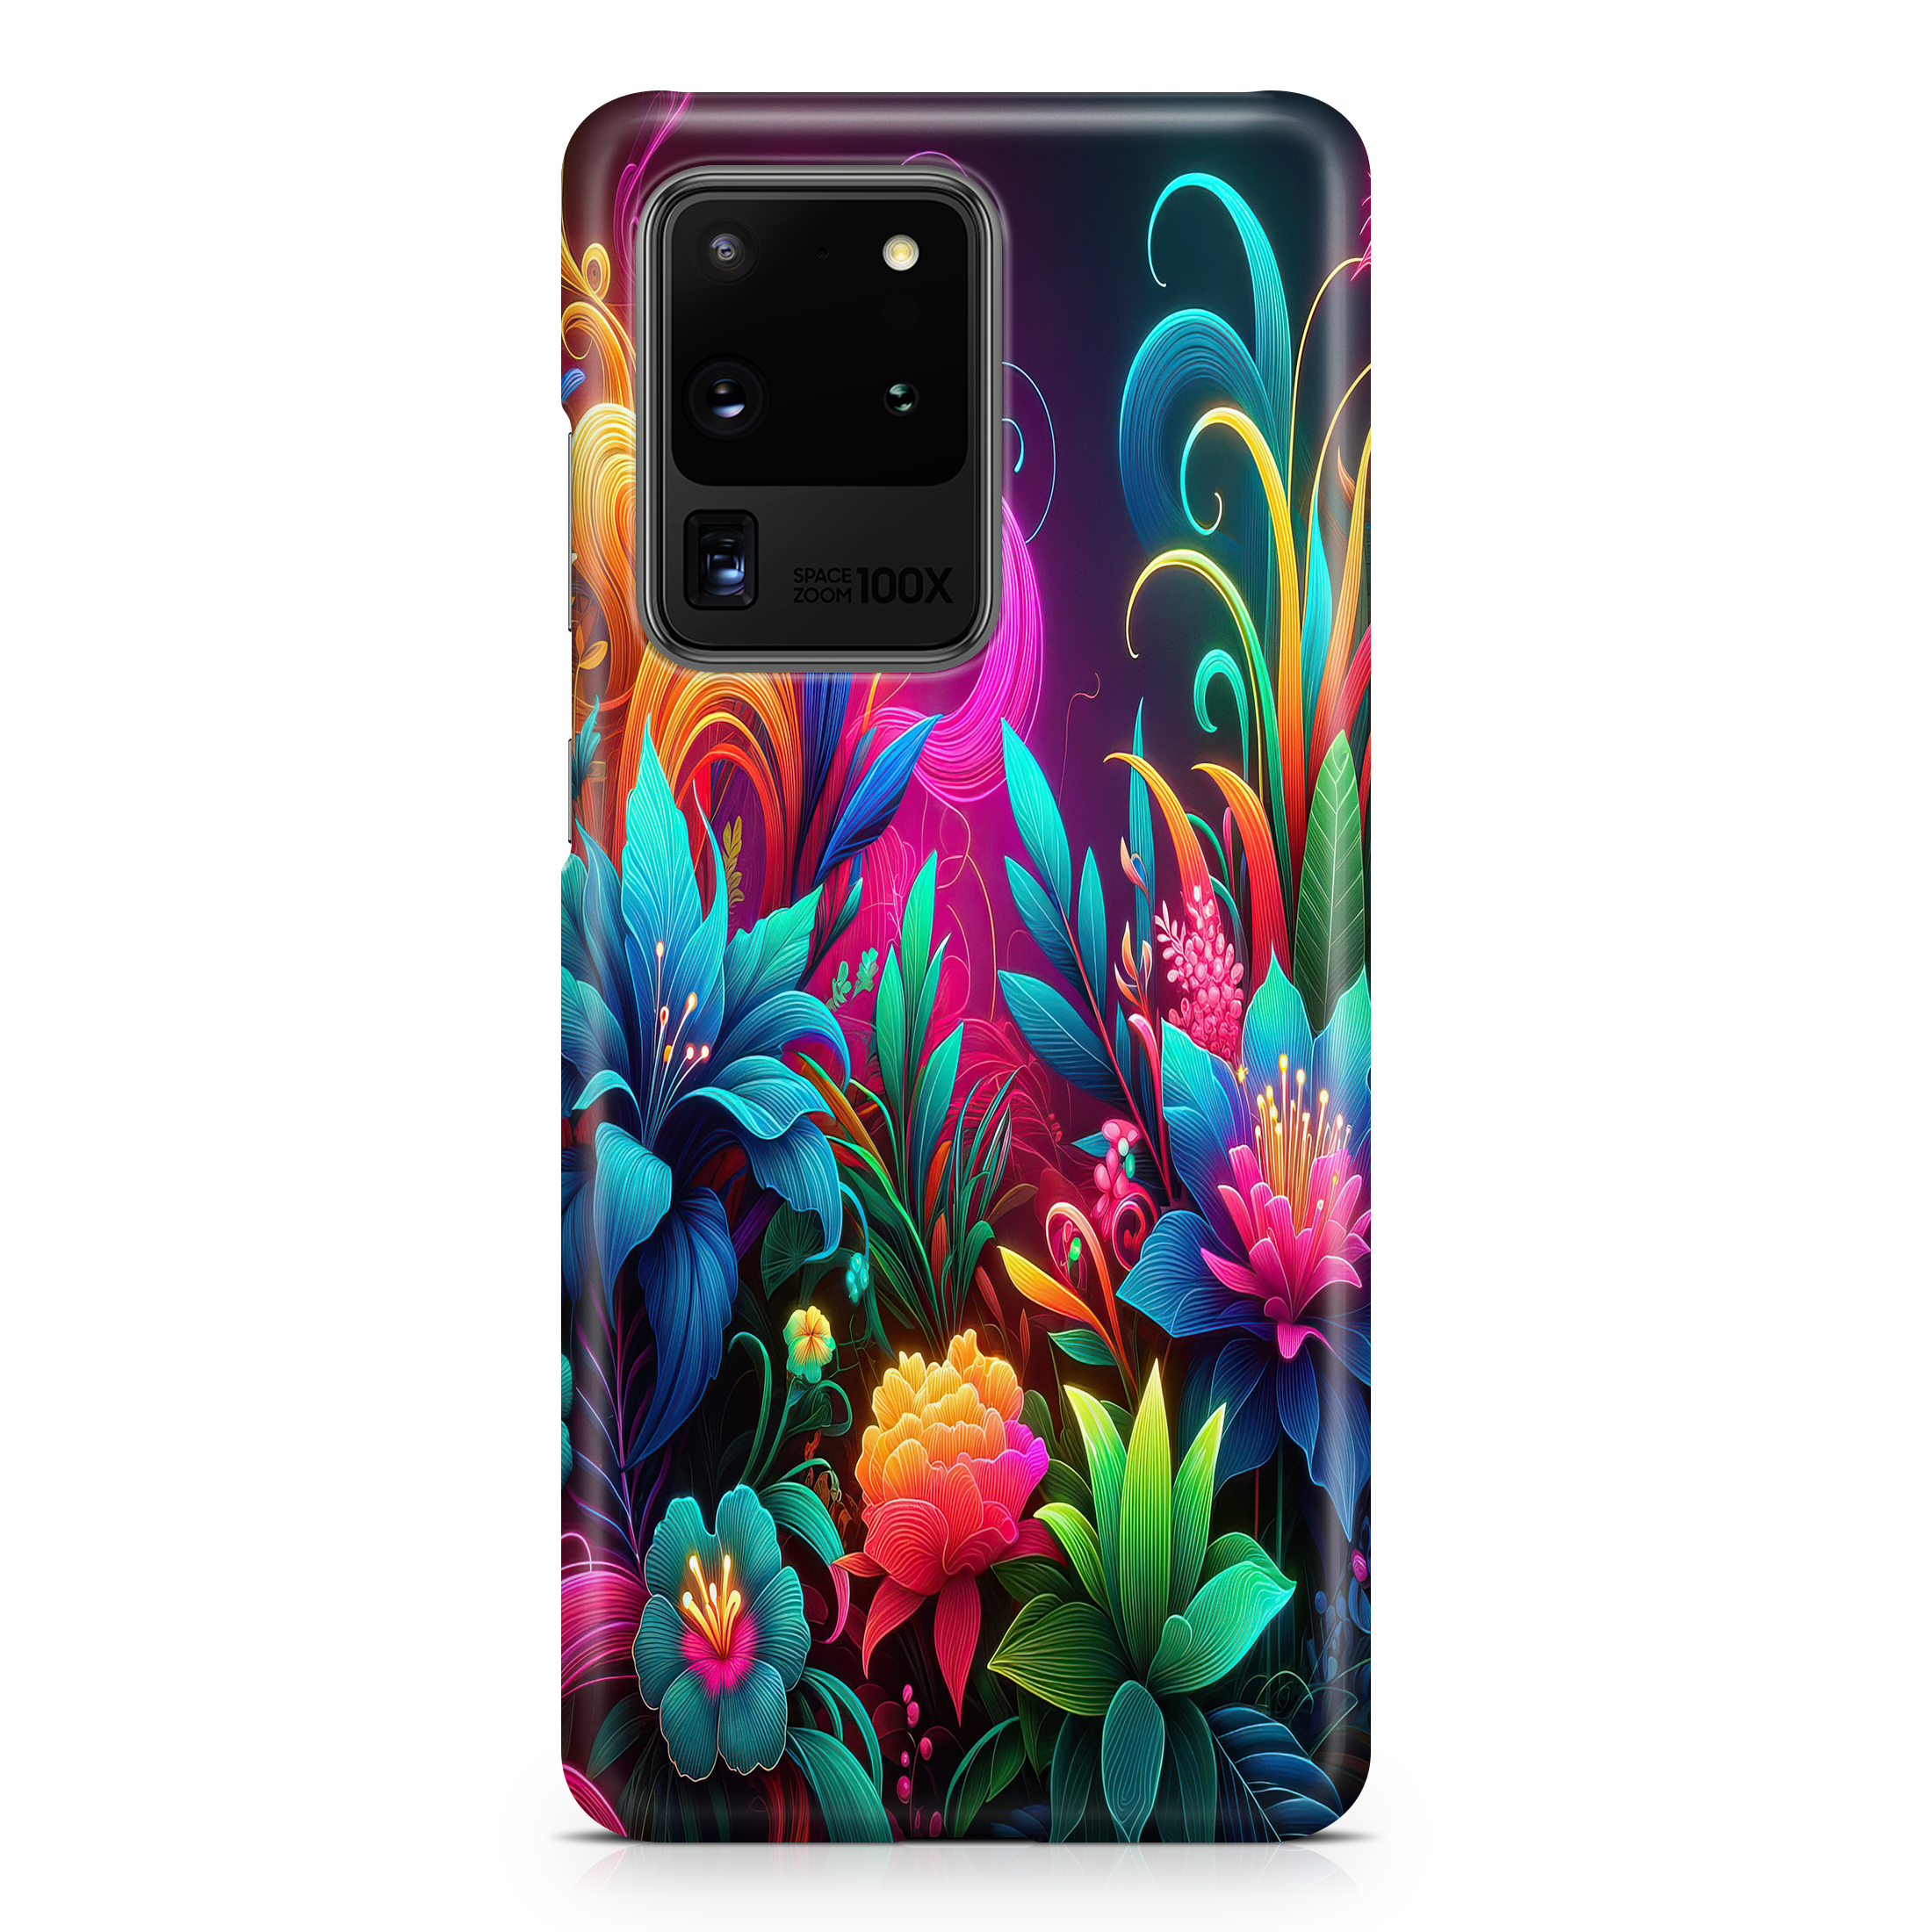 Neon Nectar - Samsung phone case designs by CaseSwagger